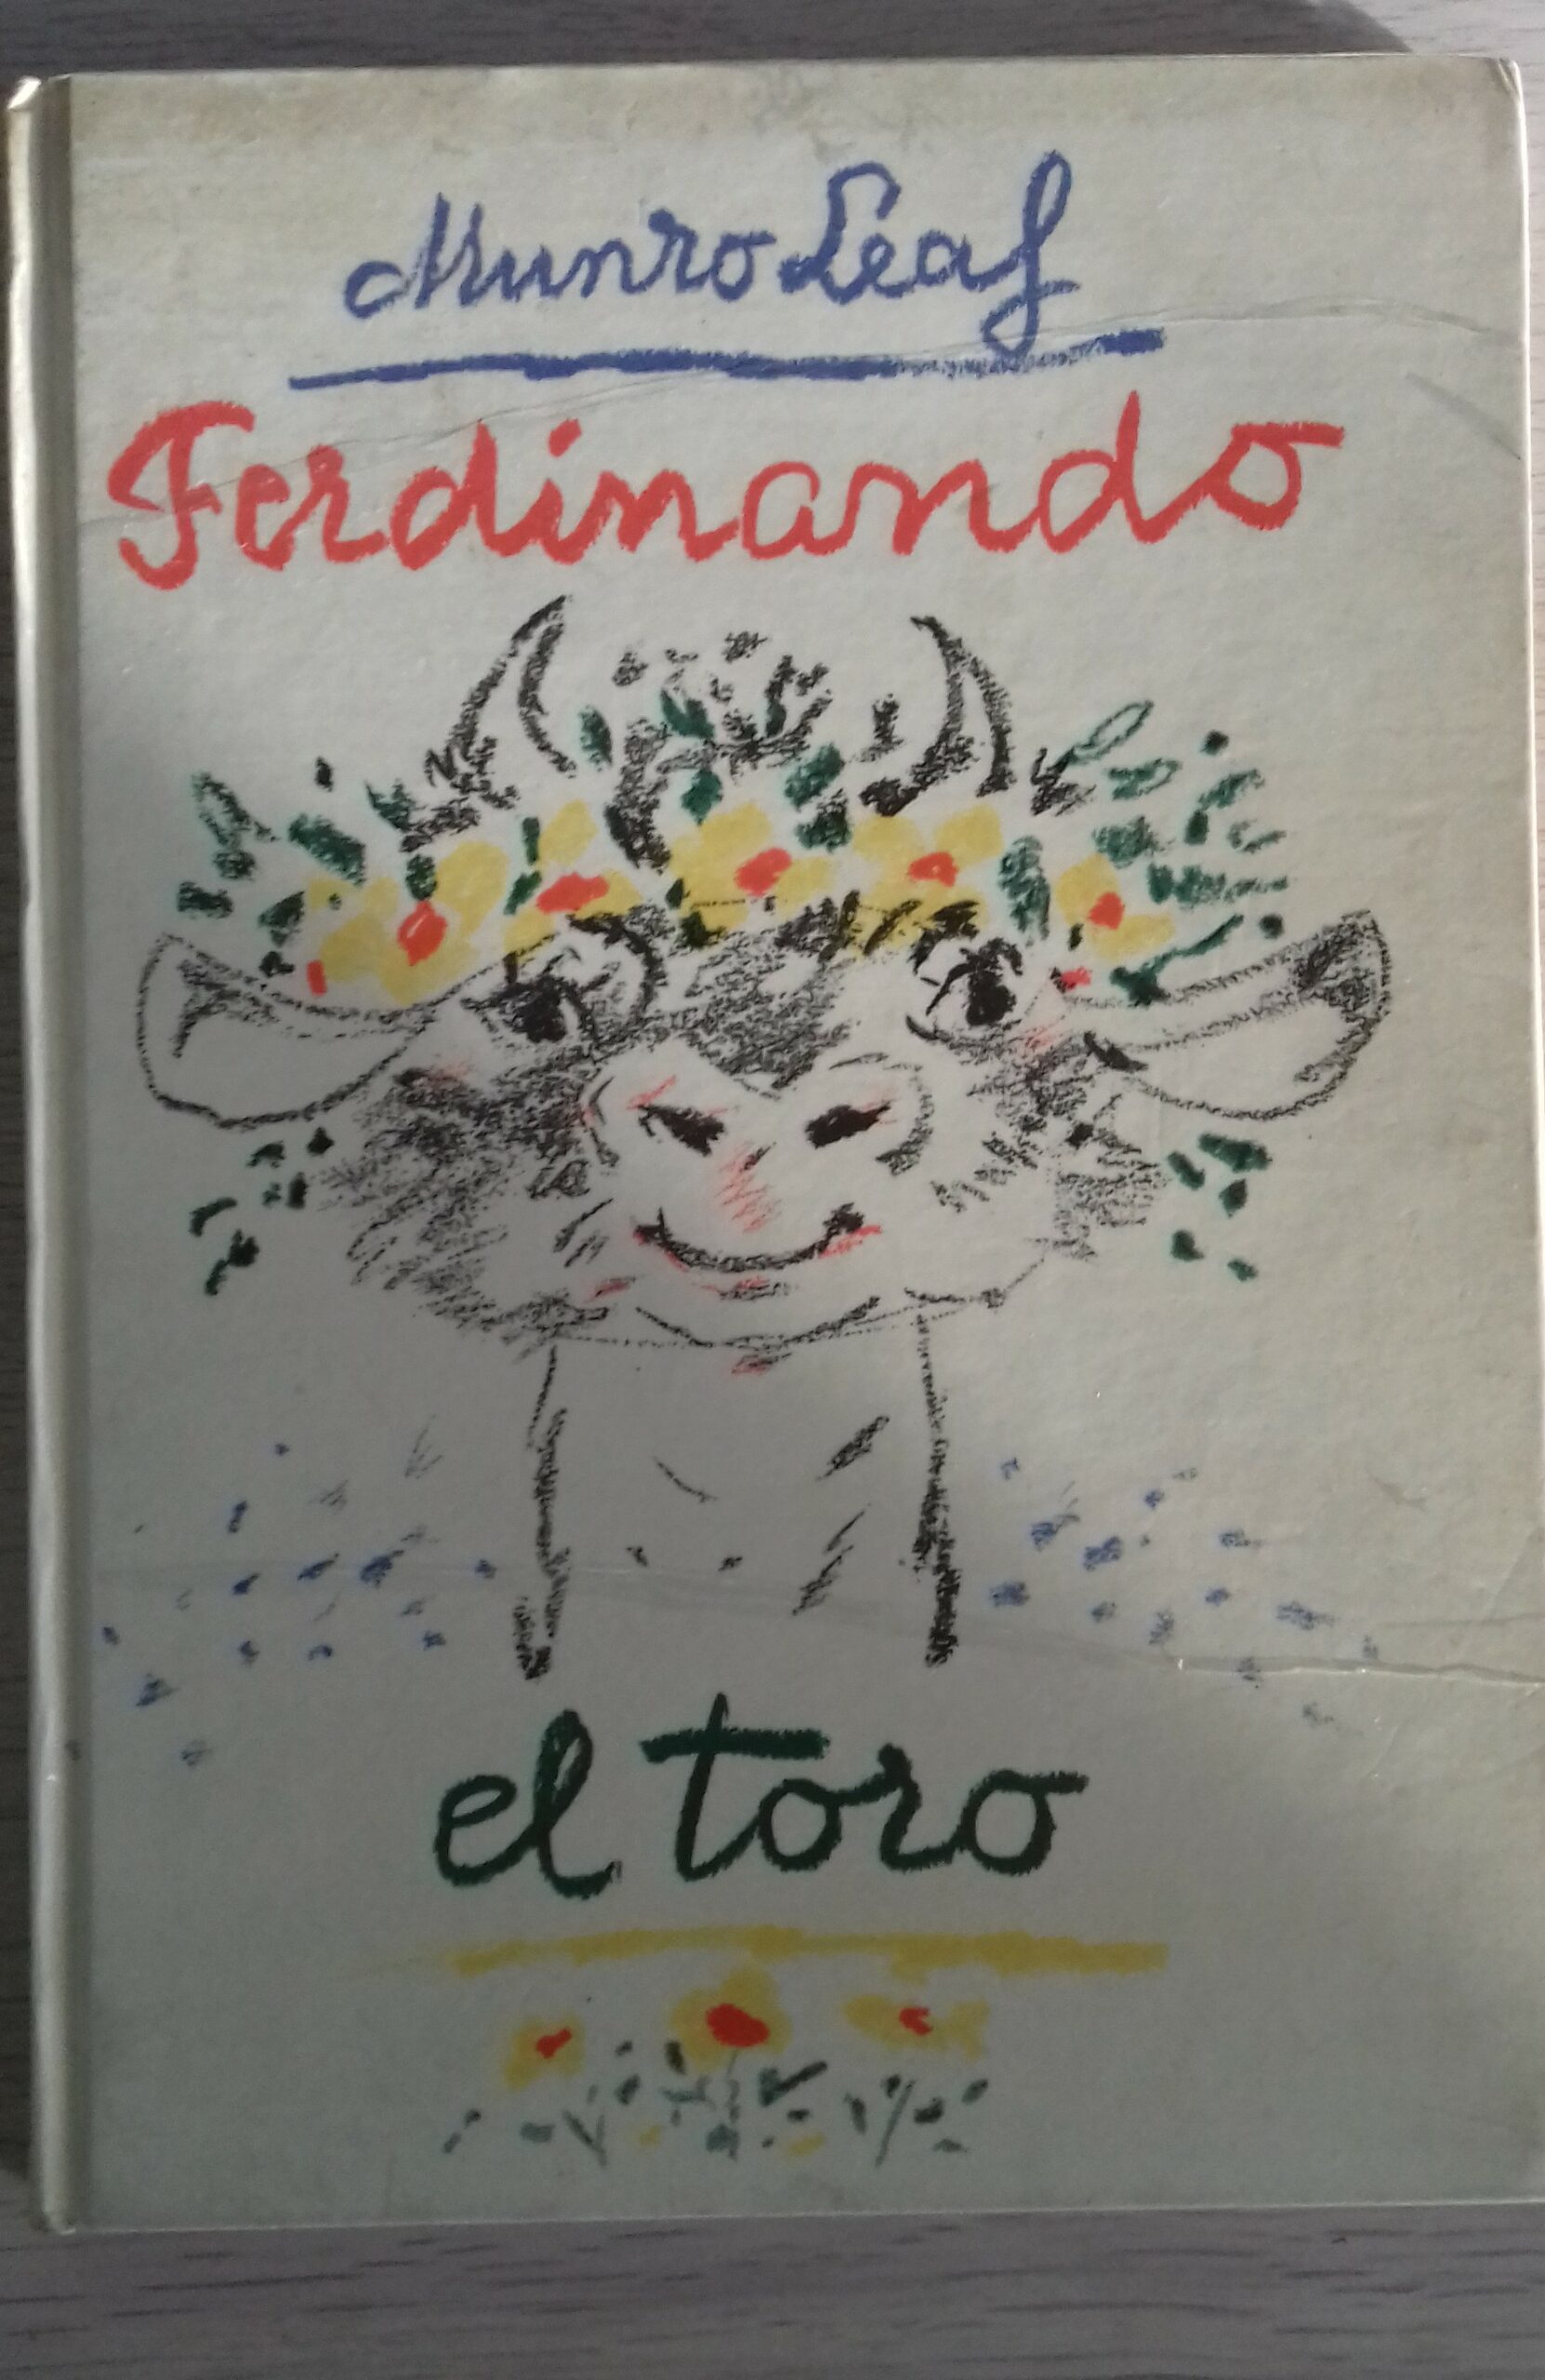 Brightly coloured image of Spanish cover of Ferdinand the BUll